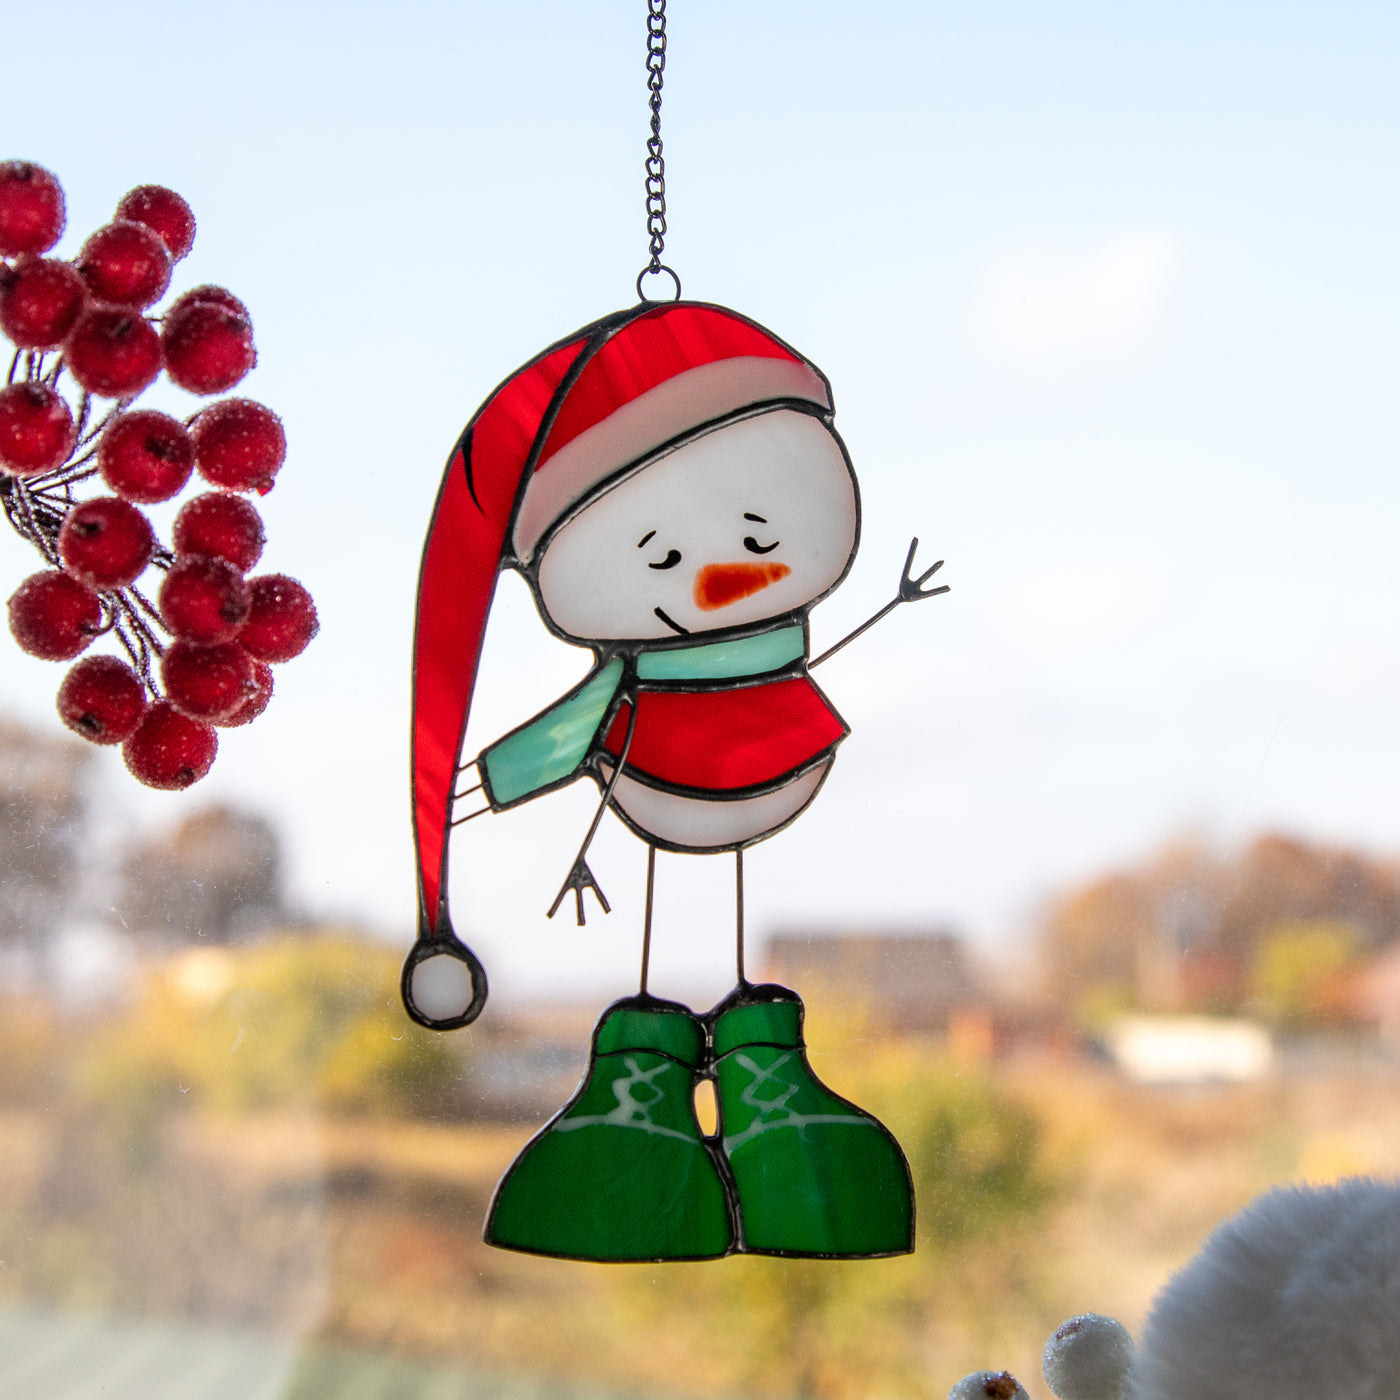 Snowman in a red hat and green boots window hanging of stained glass